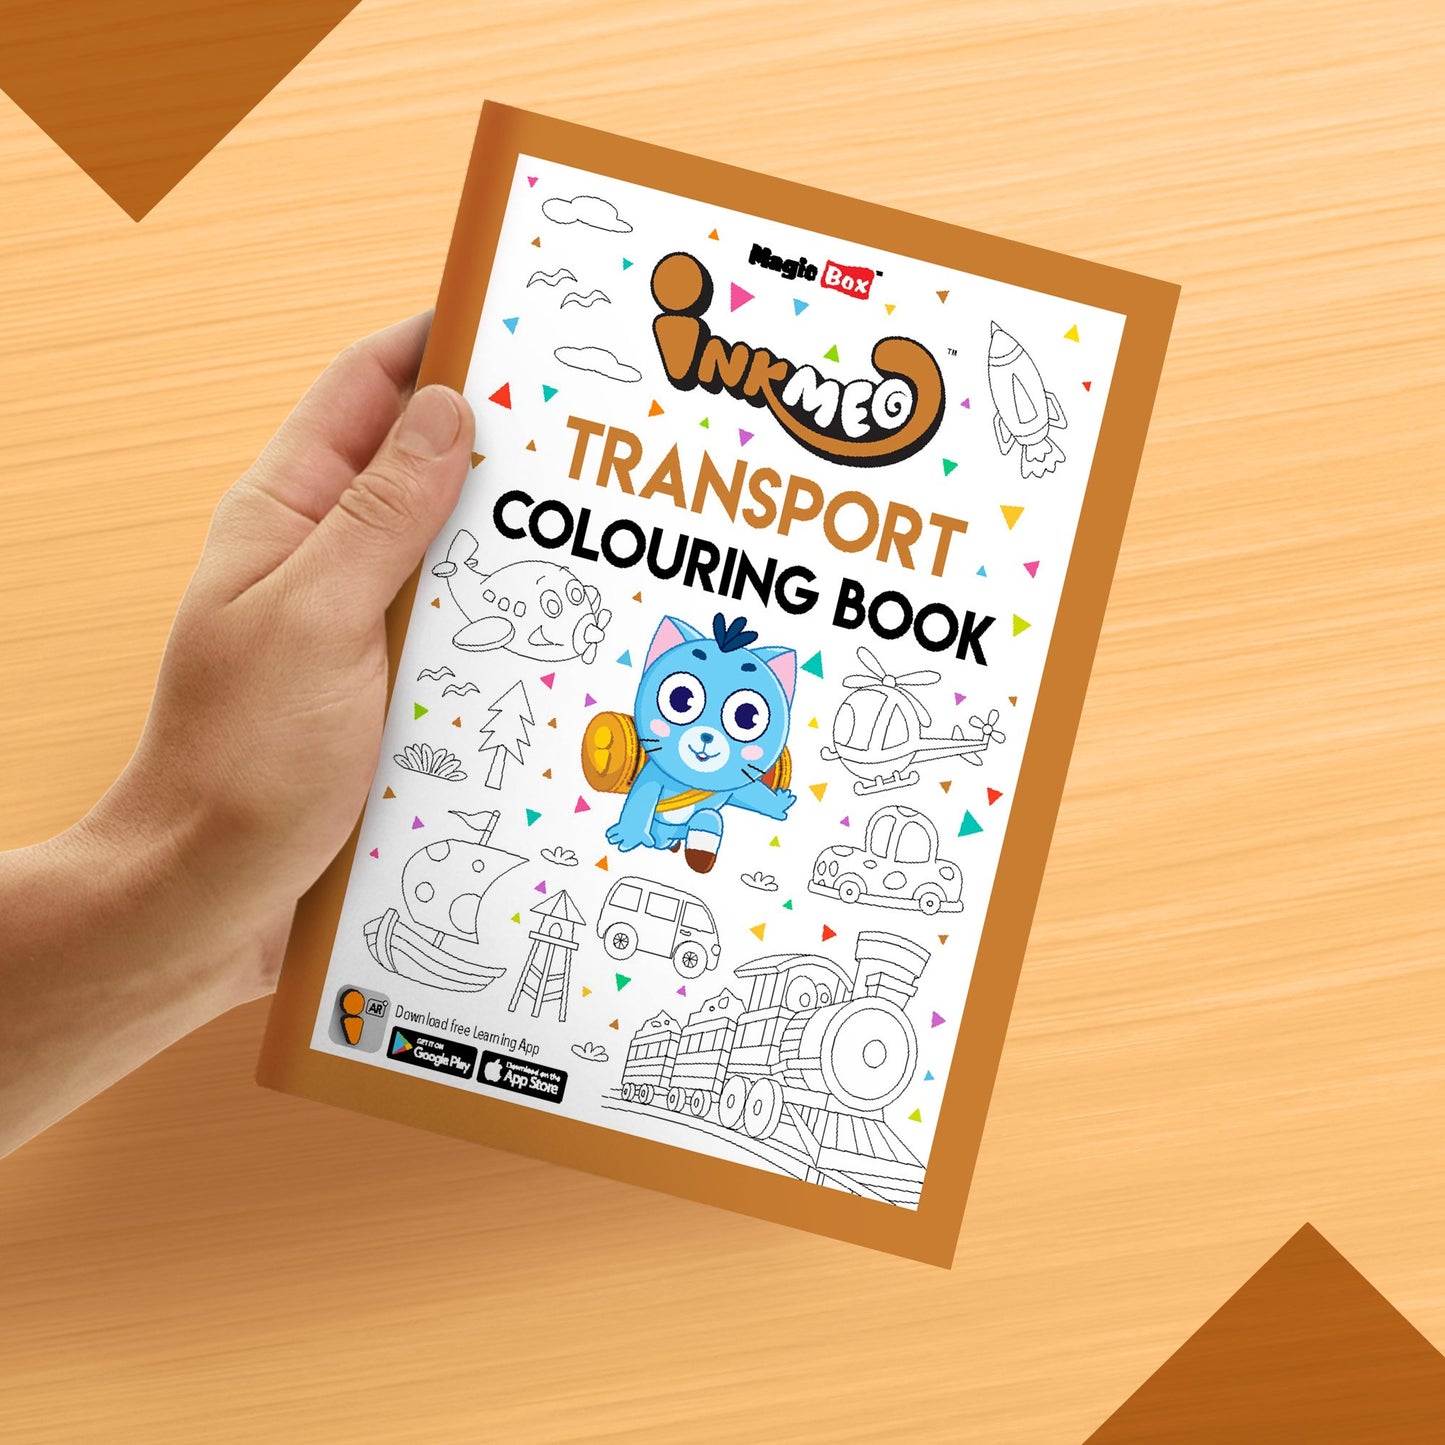 Transport Colouring Book - Inkmeo